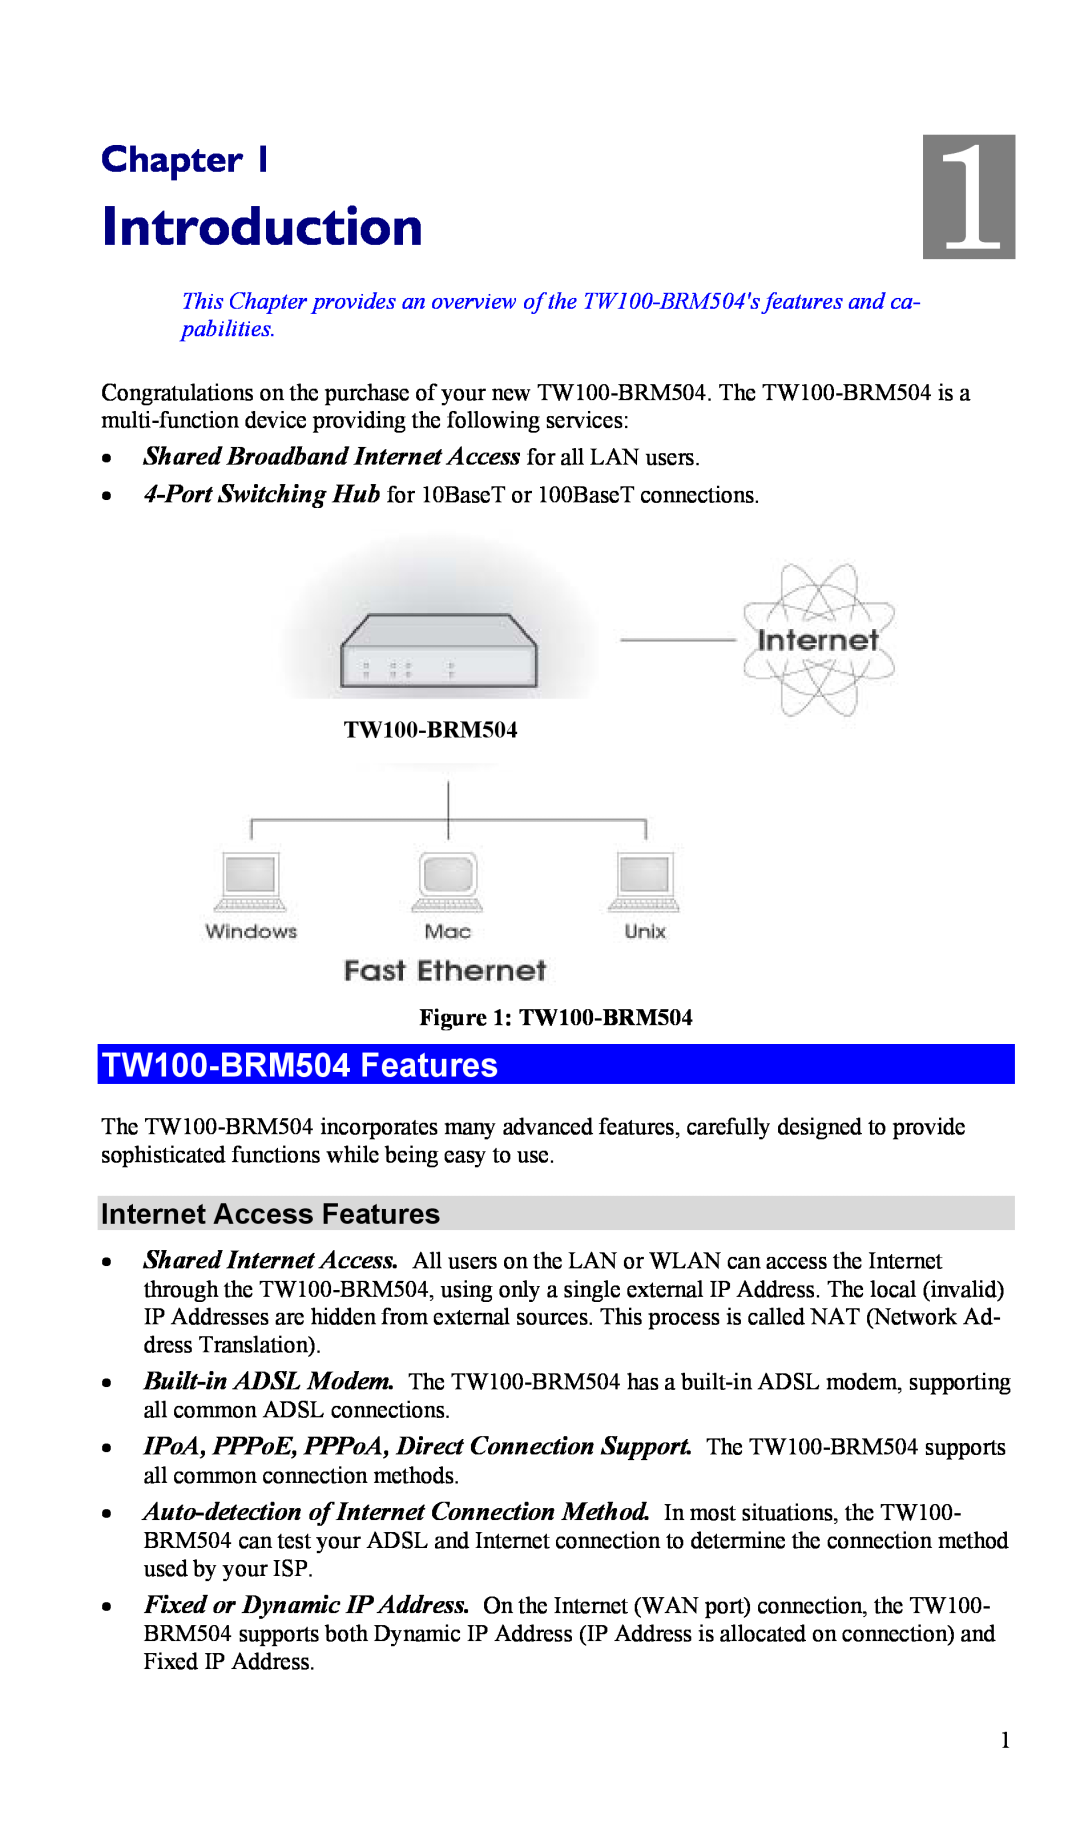 TRENDnet manual Introduction, Chapter, TW100-BRM504Features, Internet Access Features 